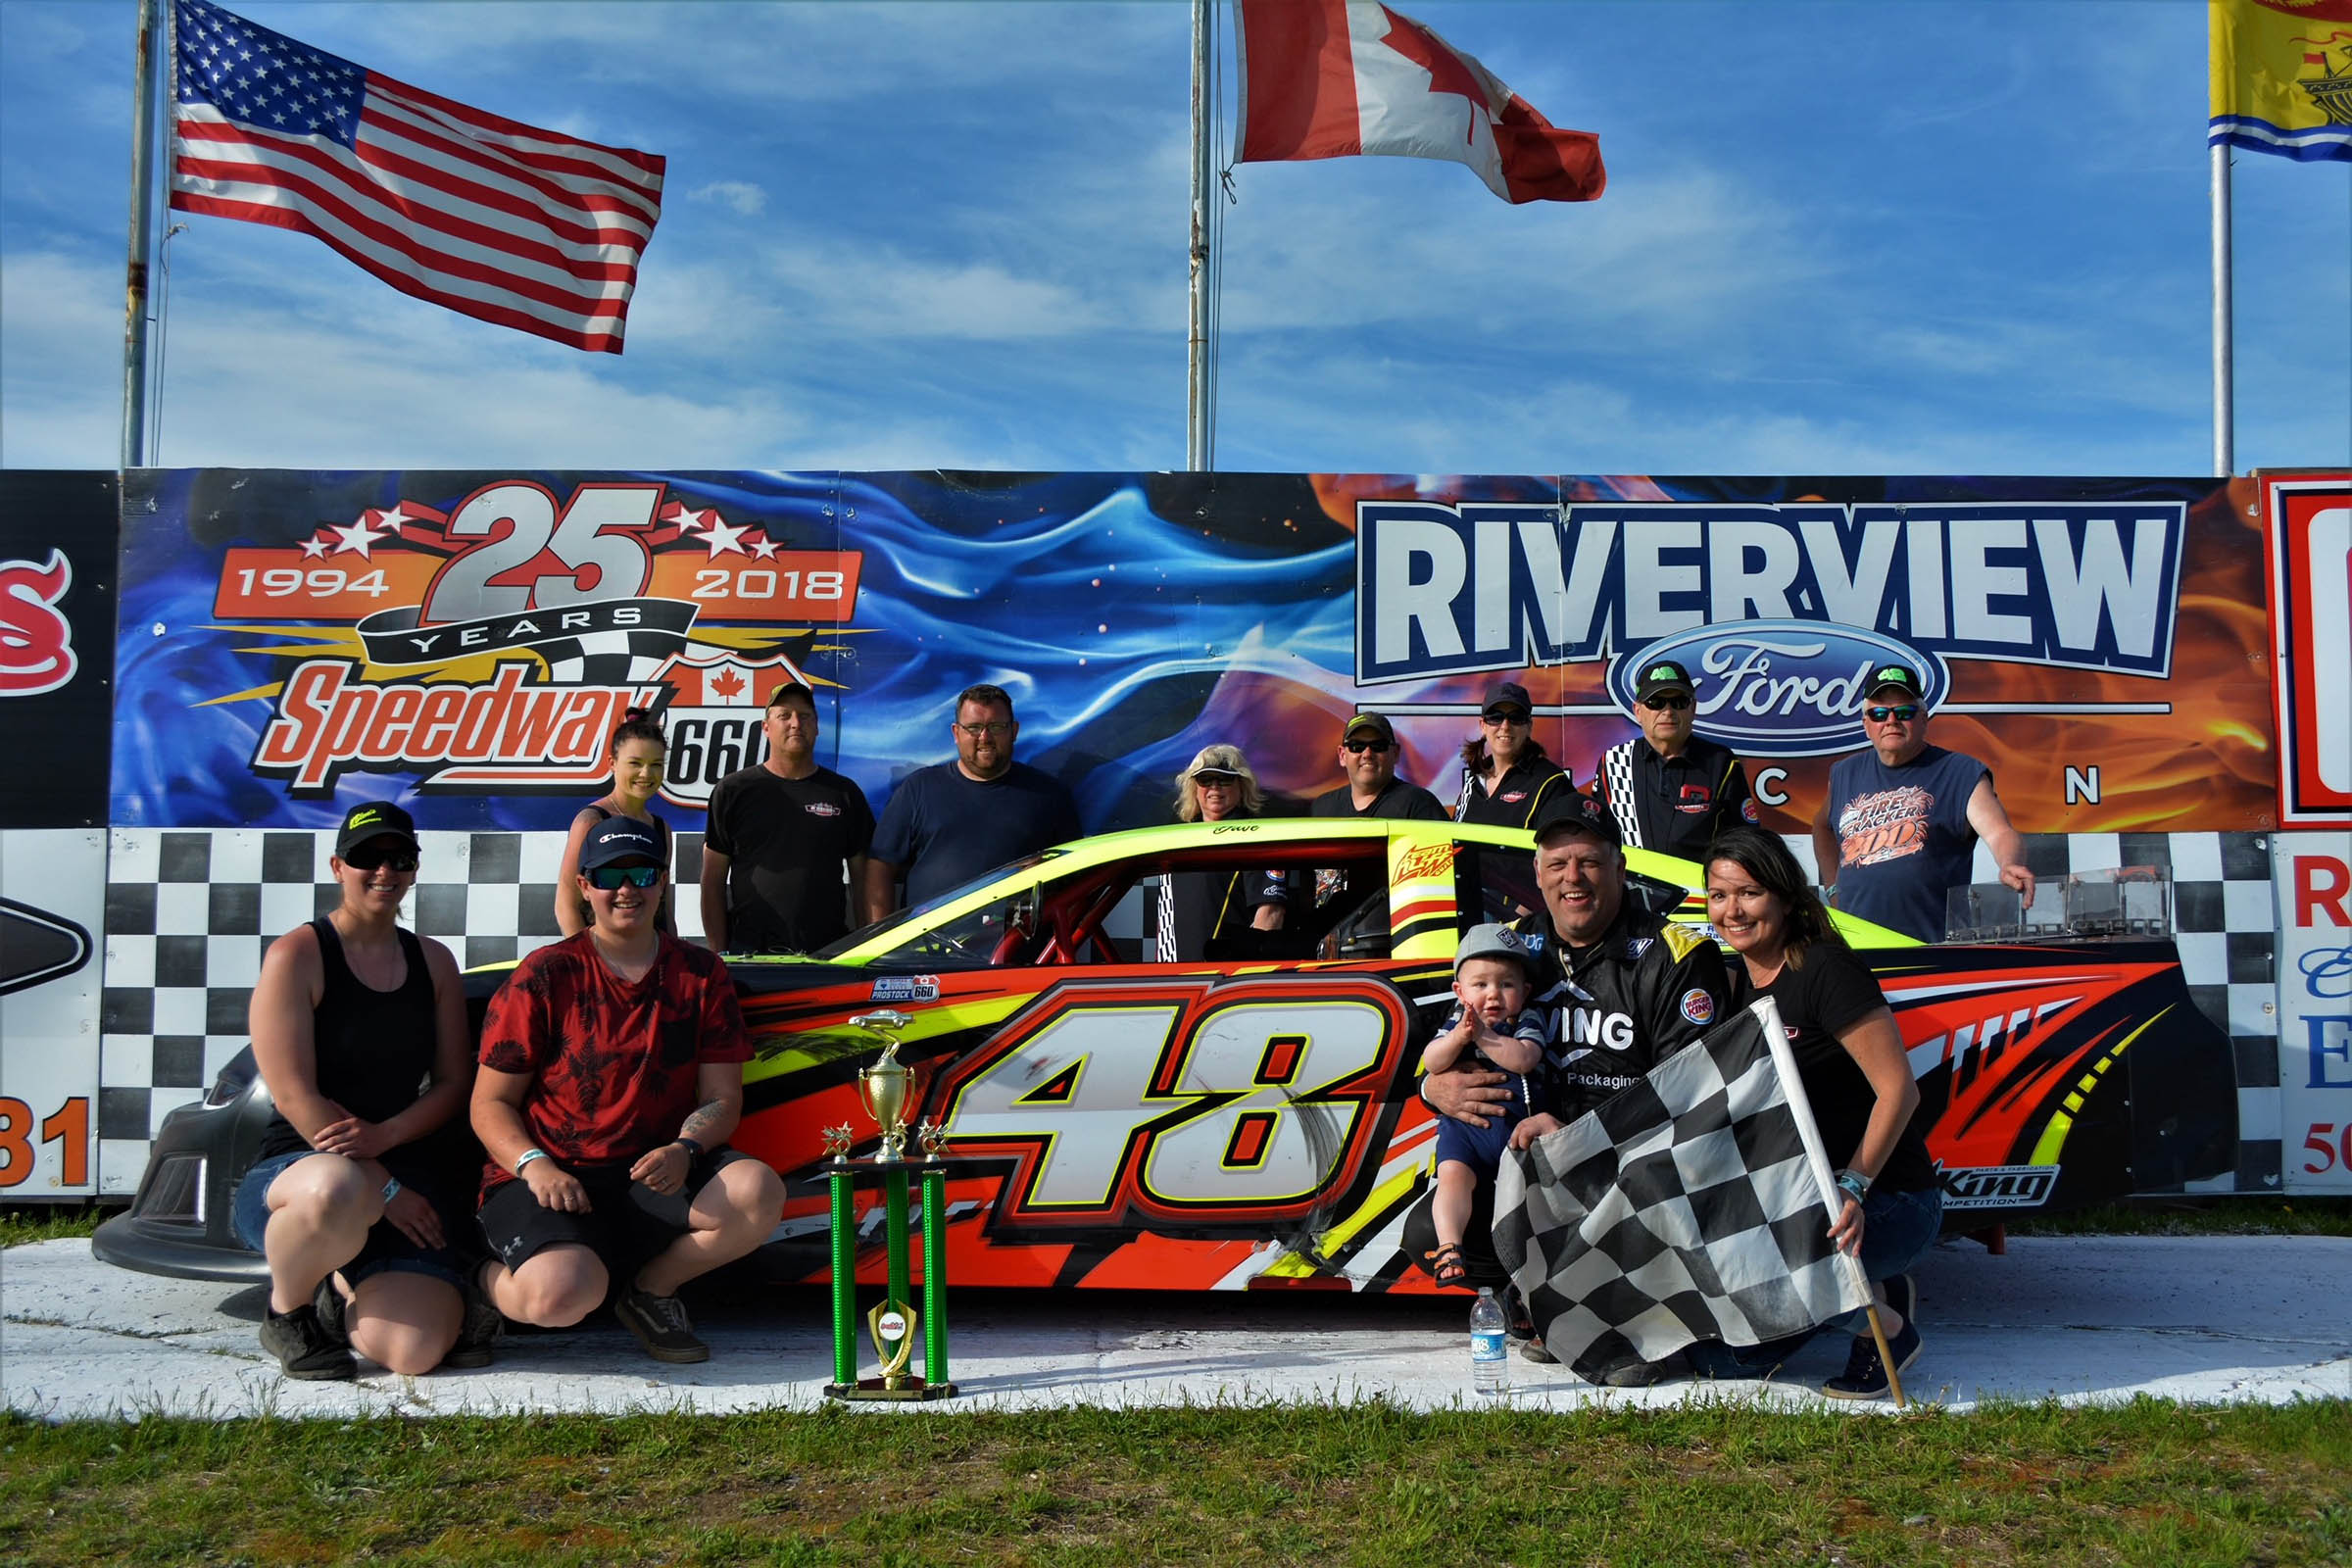 DAVE O’BLENIS SCORES 100TH FEATURE WIN SUNDAY AT SPEEDWAY 660